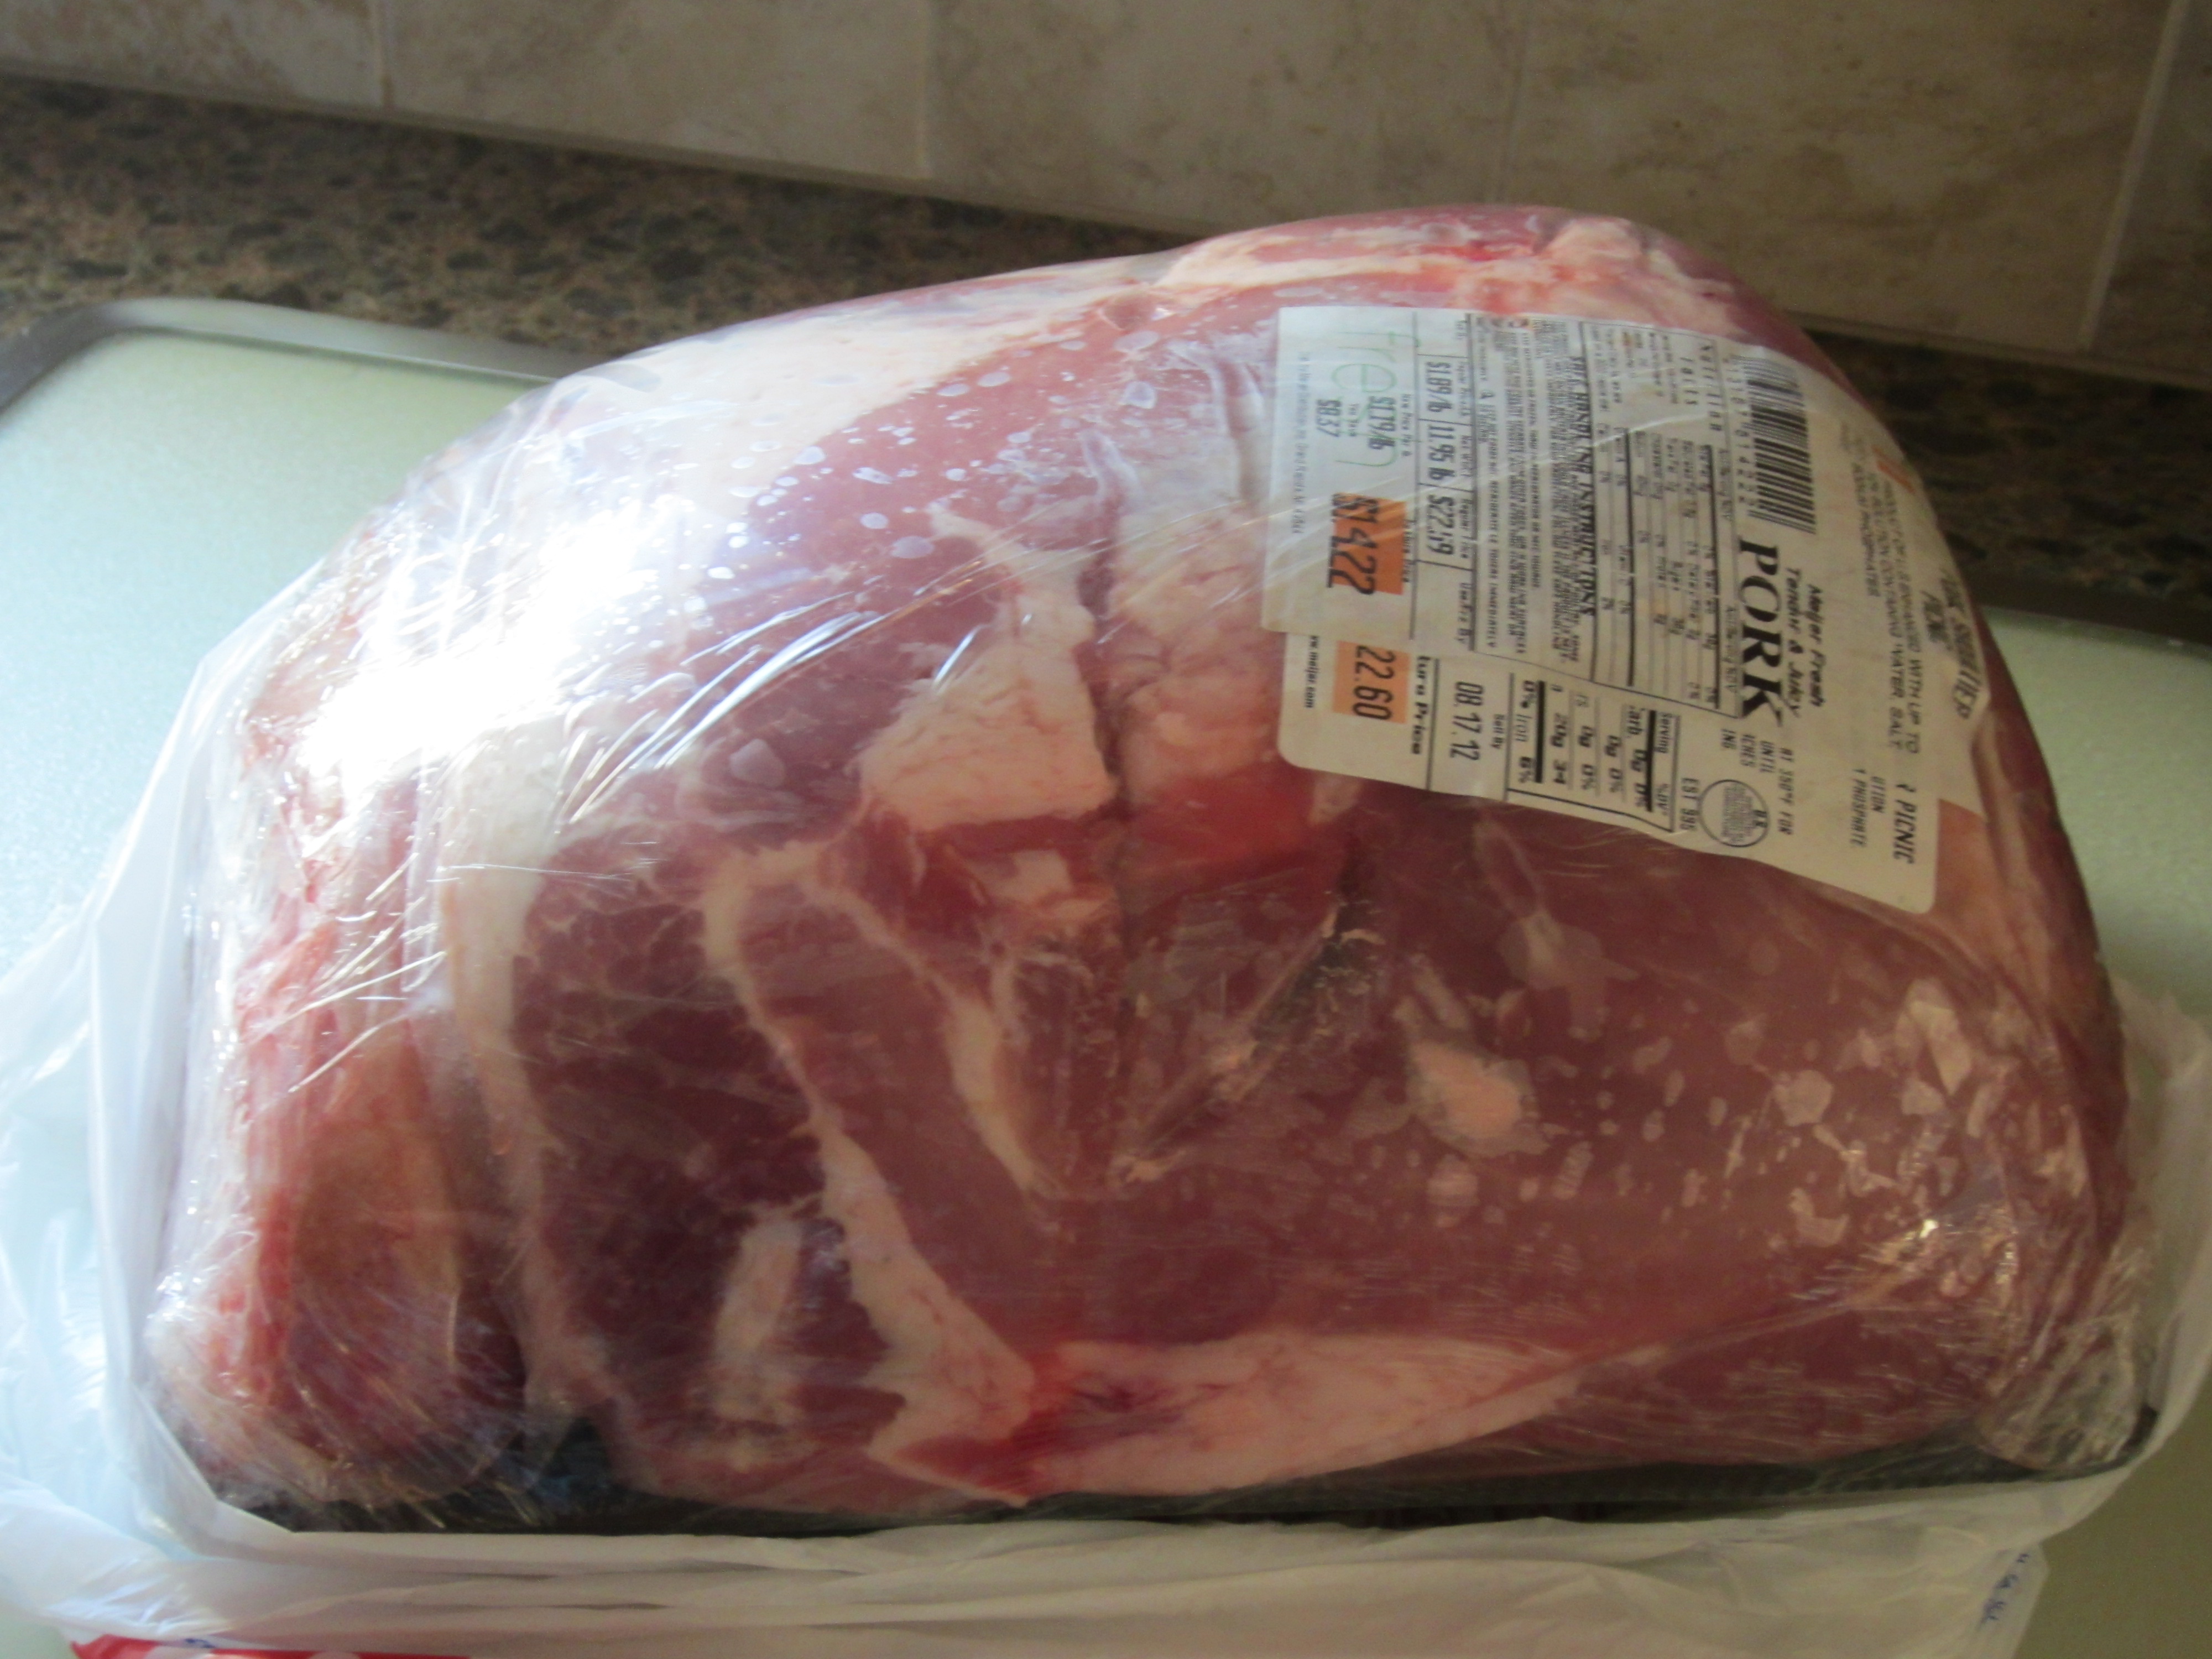 Large cuts of meat are often on sale